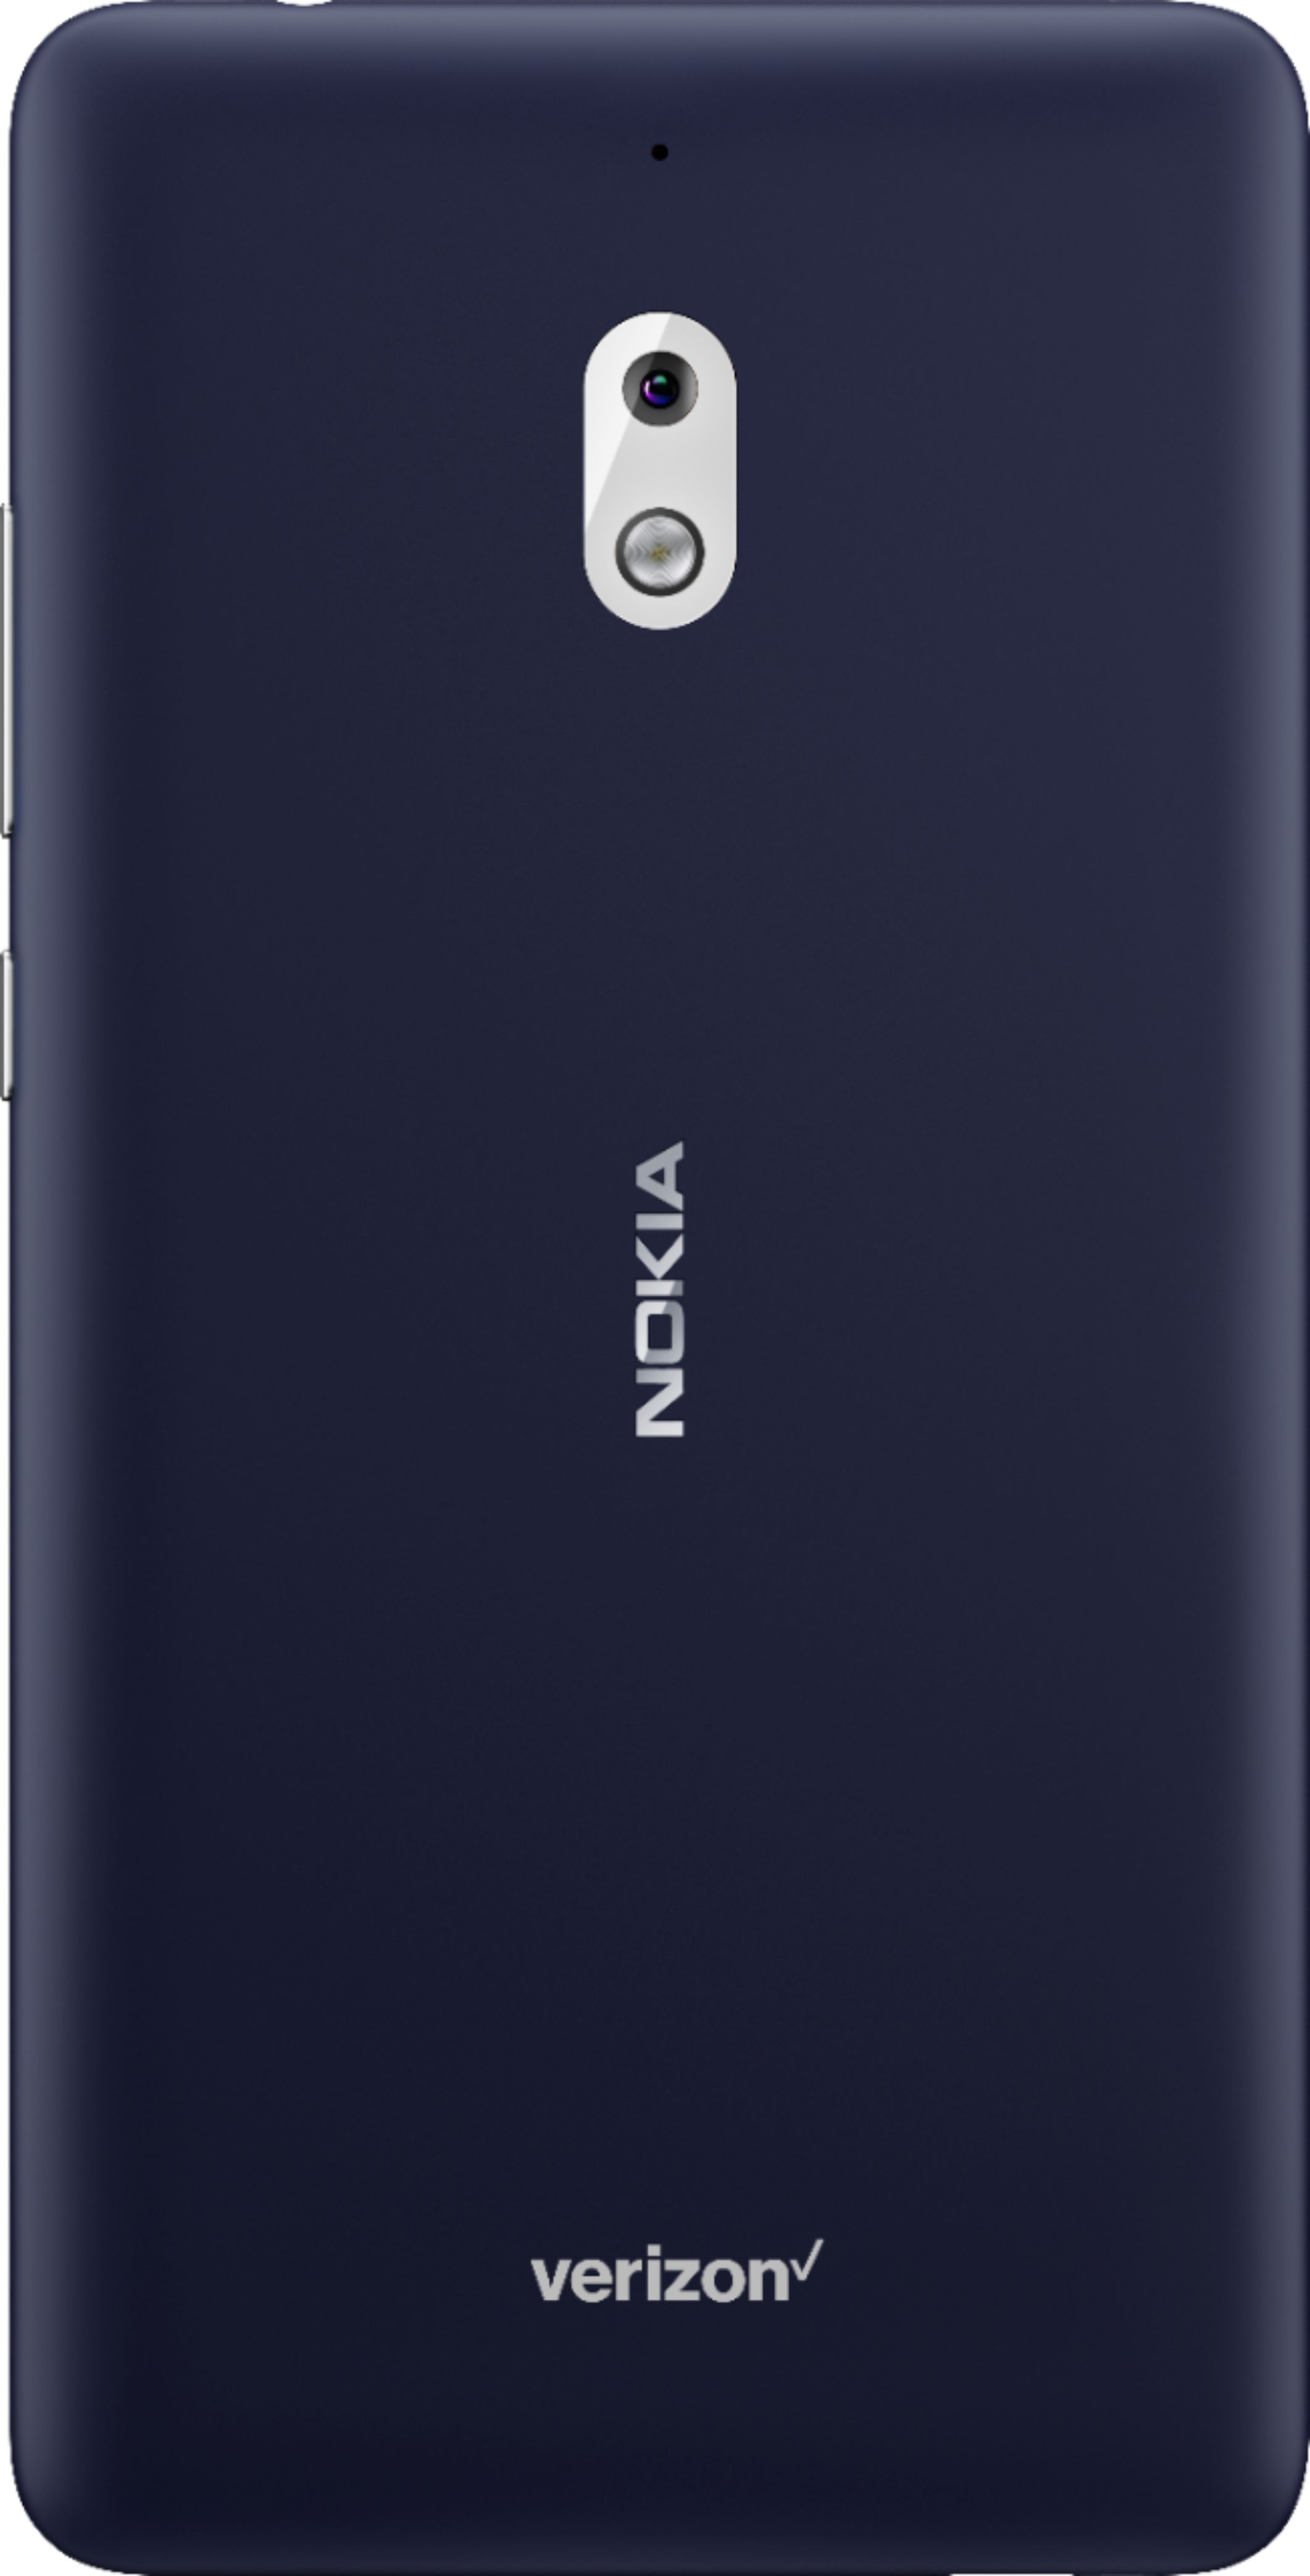 Back View: Save $10 on Nokia 2V with Verizon $50 Airtime Card (Walmart.com Exclusive Offer)